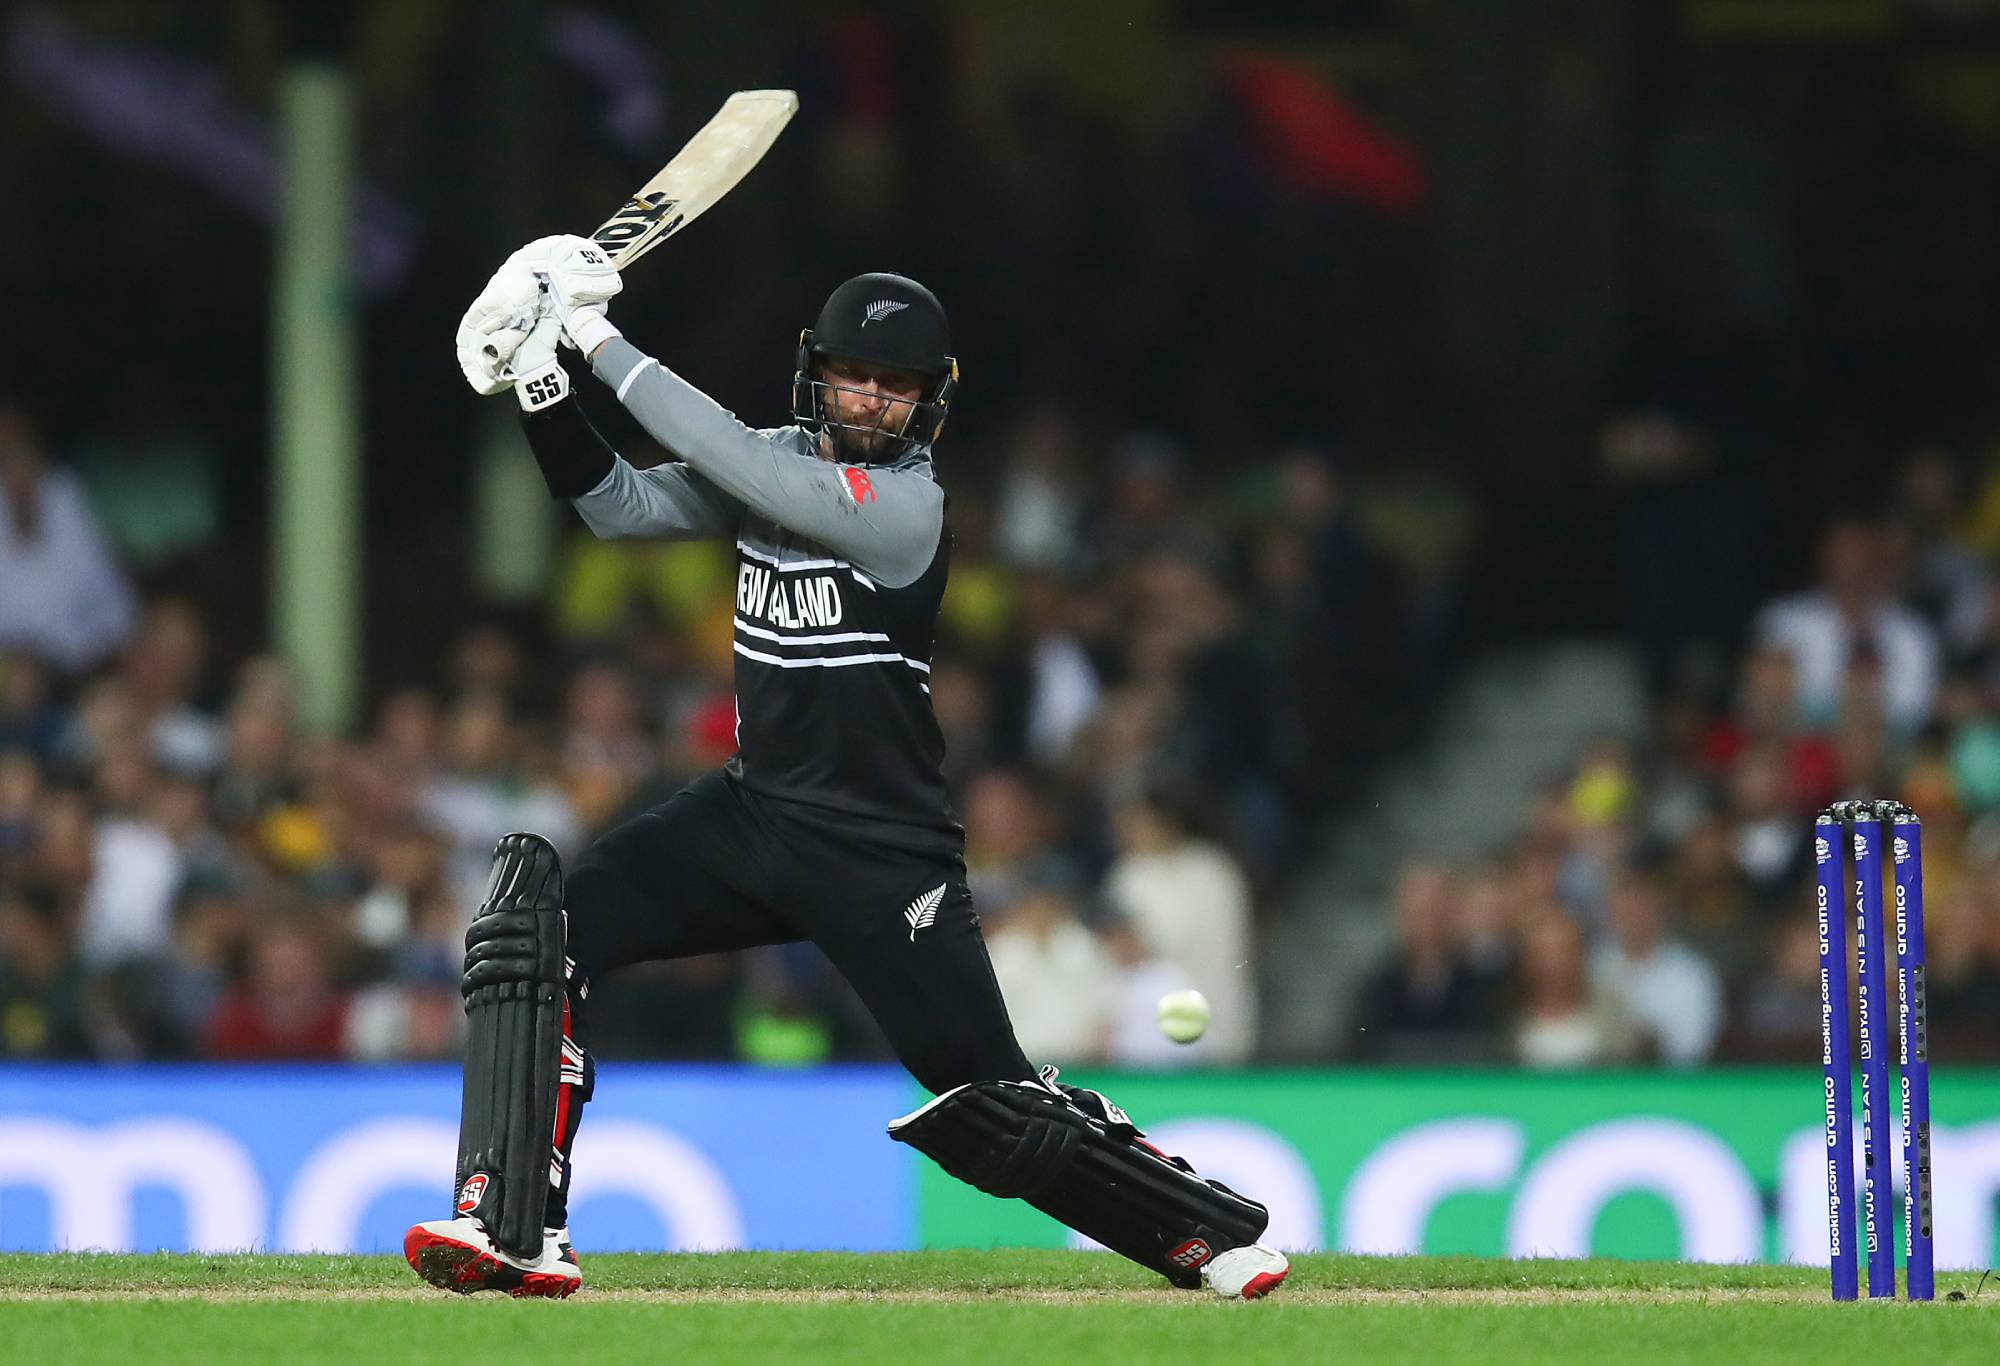 SYDNEY, AUSTRALIA - OCTOBER 22: Devon Conway of New Zealand bats during the ICC Men's T20 World Cup match between Australia and New Zealand at Sydney Cricket Ground on October 22, 2022 in Sydney, Australia. (Photo by Jason McCawley-ICC/ICC via Getty Images)